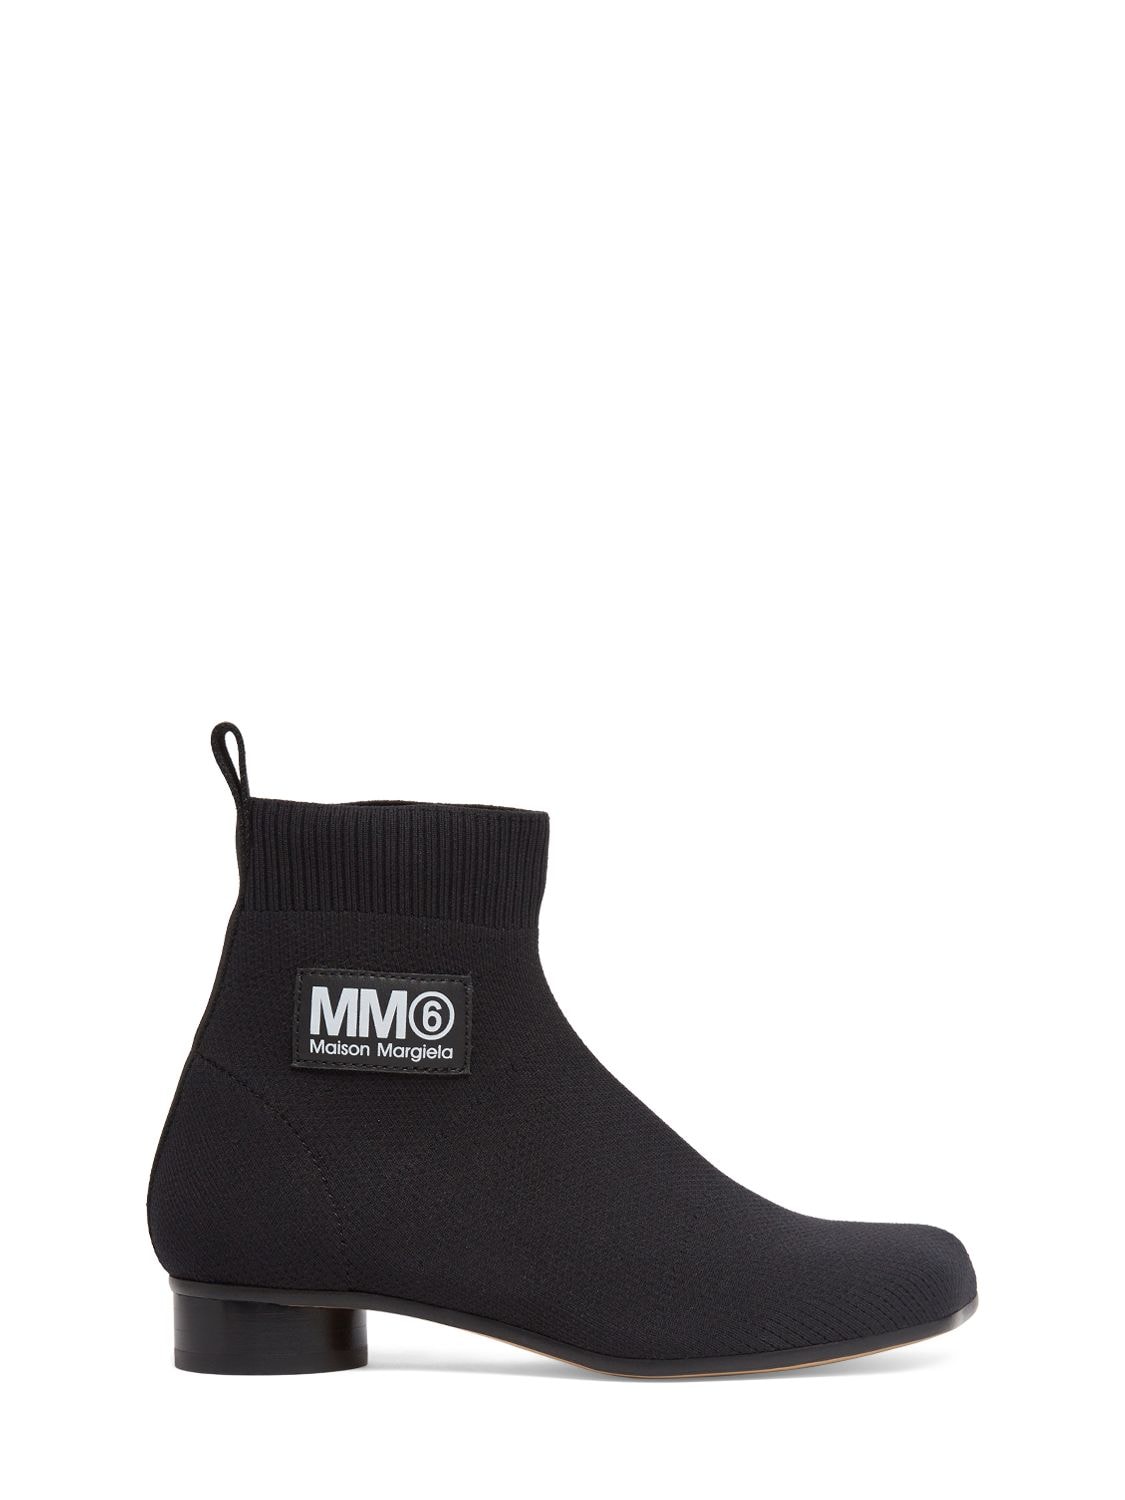 Image of Knit Ankle Boots W/logo